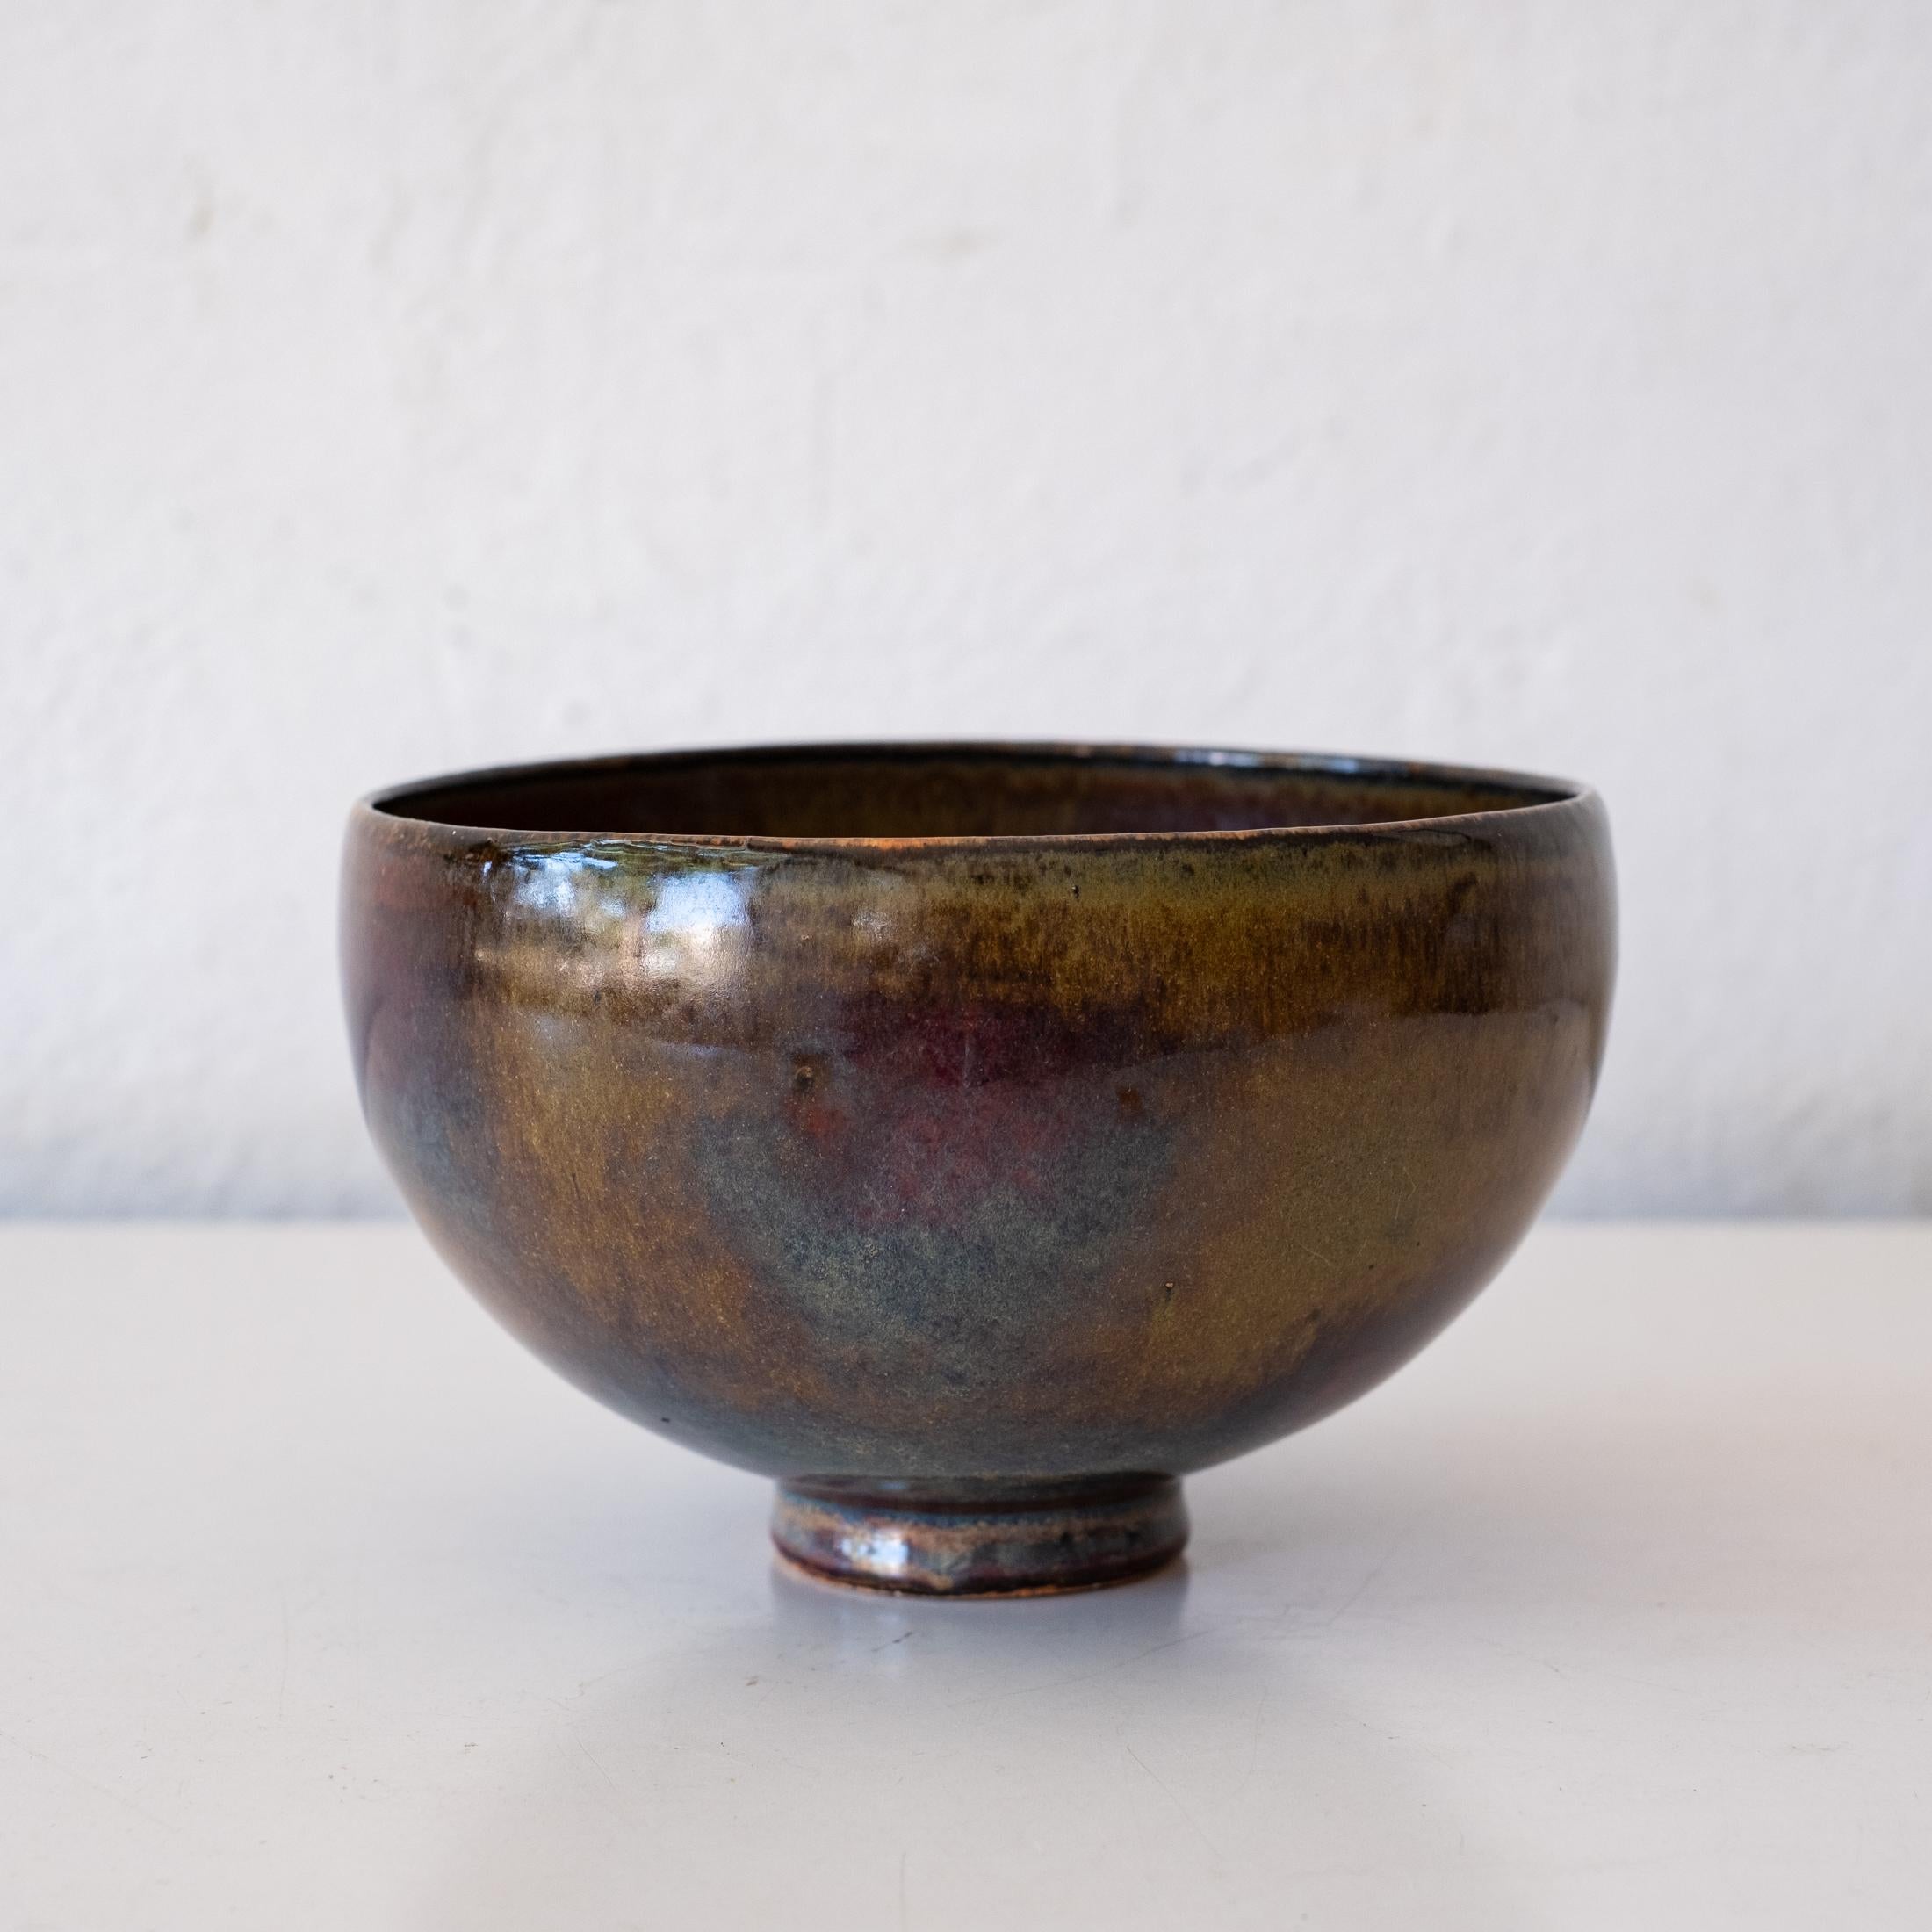 Beautiful early stoneware bowl by Edwin and Mary Scheier. Footed form in glossy copper, oxblood and blue. Signed in clay on bottom: Scheier

Edwin Scheier (1910–2008)
Mary Scheier (1908–2007)

Works by Scheier are included in major museum